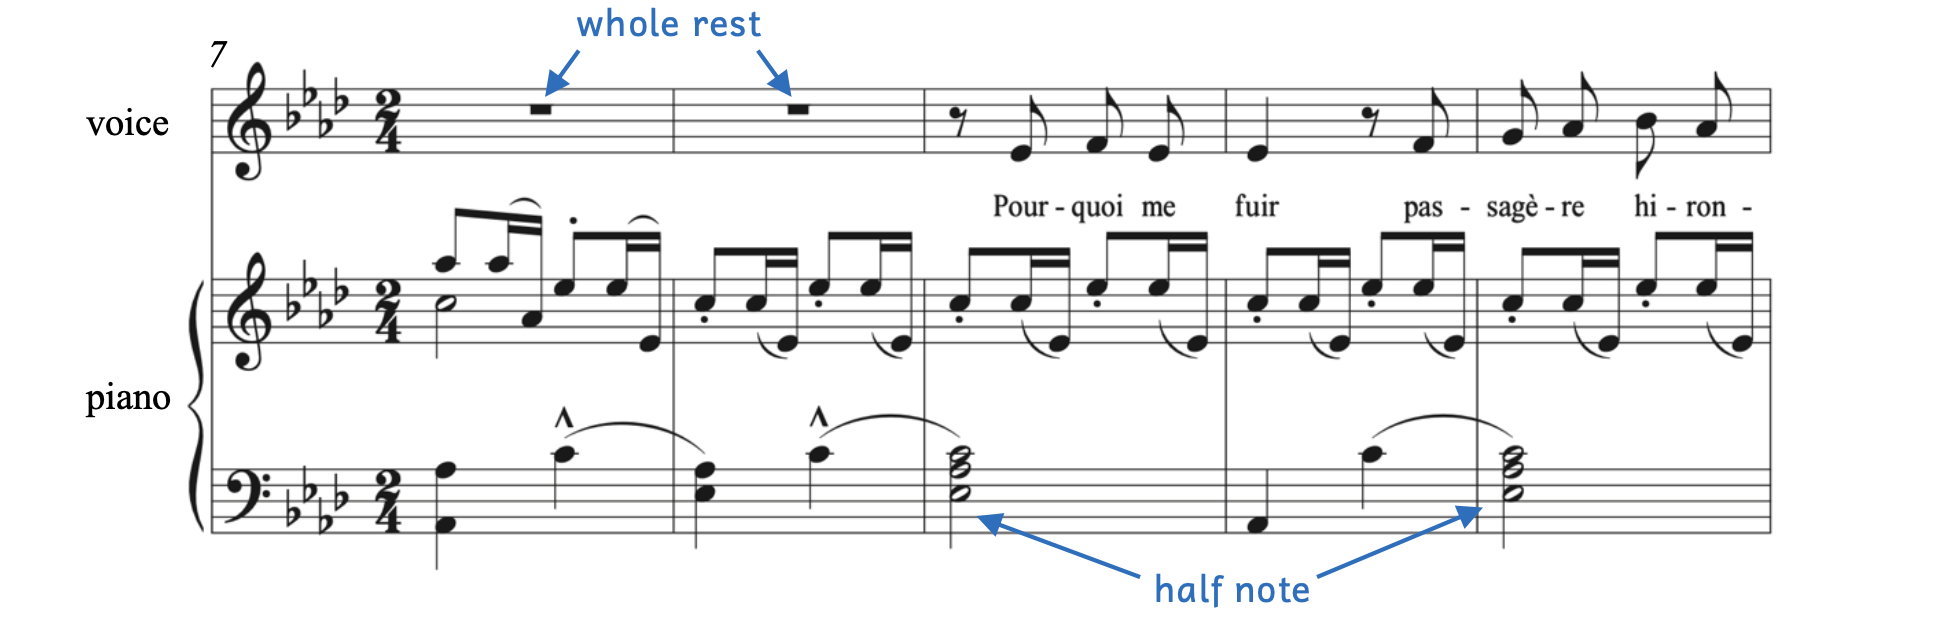 Bertin's "L'Hirondelle" for voice and piano shows how whole rests fill a measure in 2-4 while half notes fill a measure.